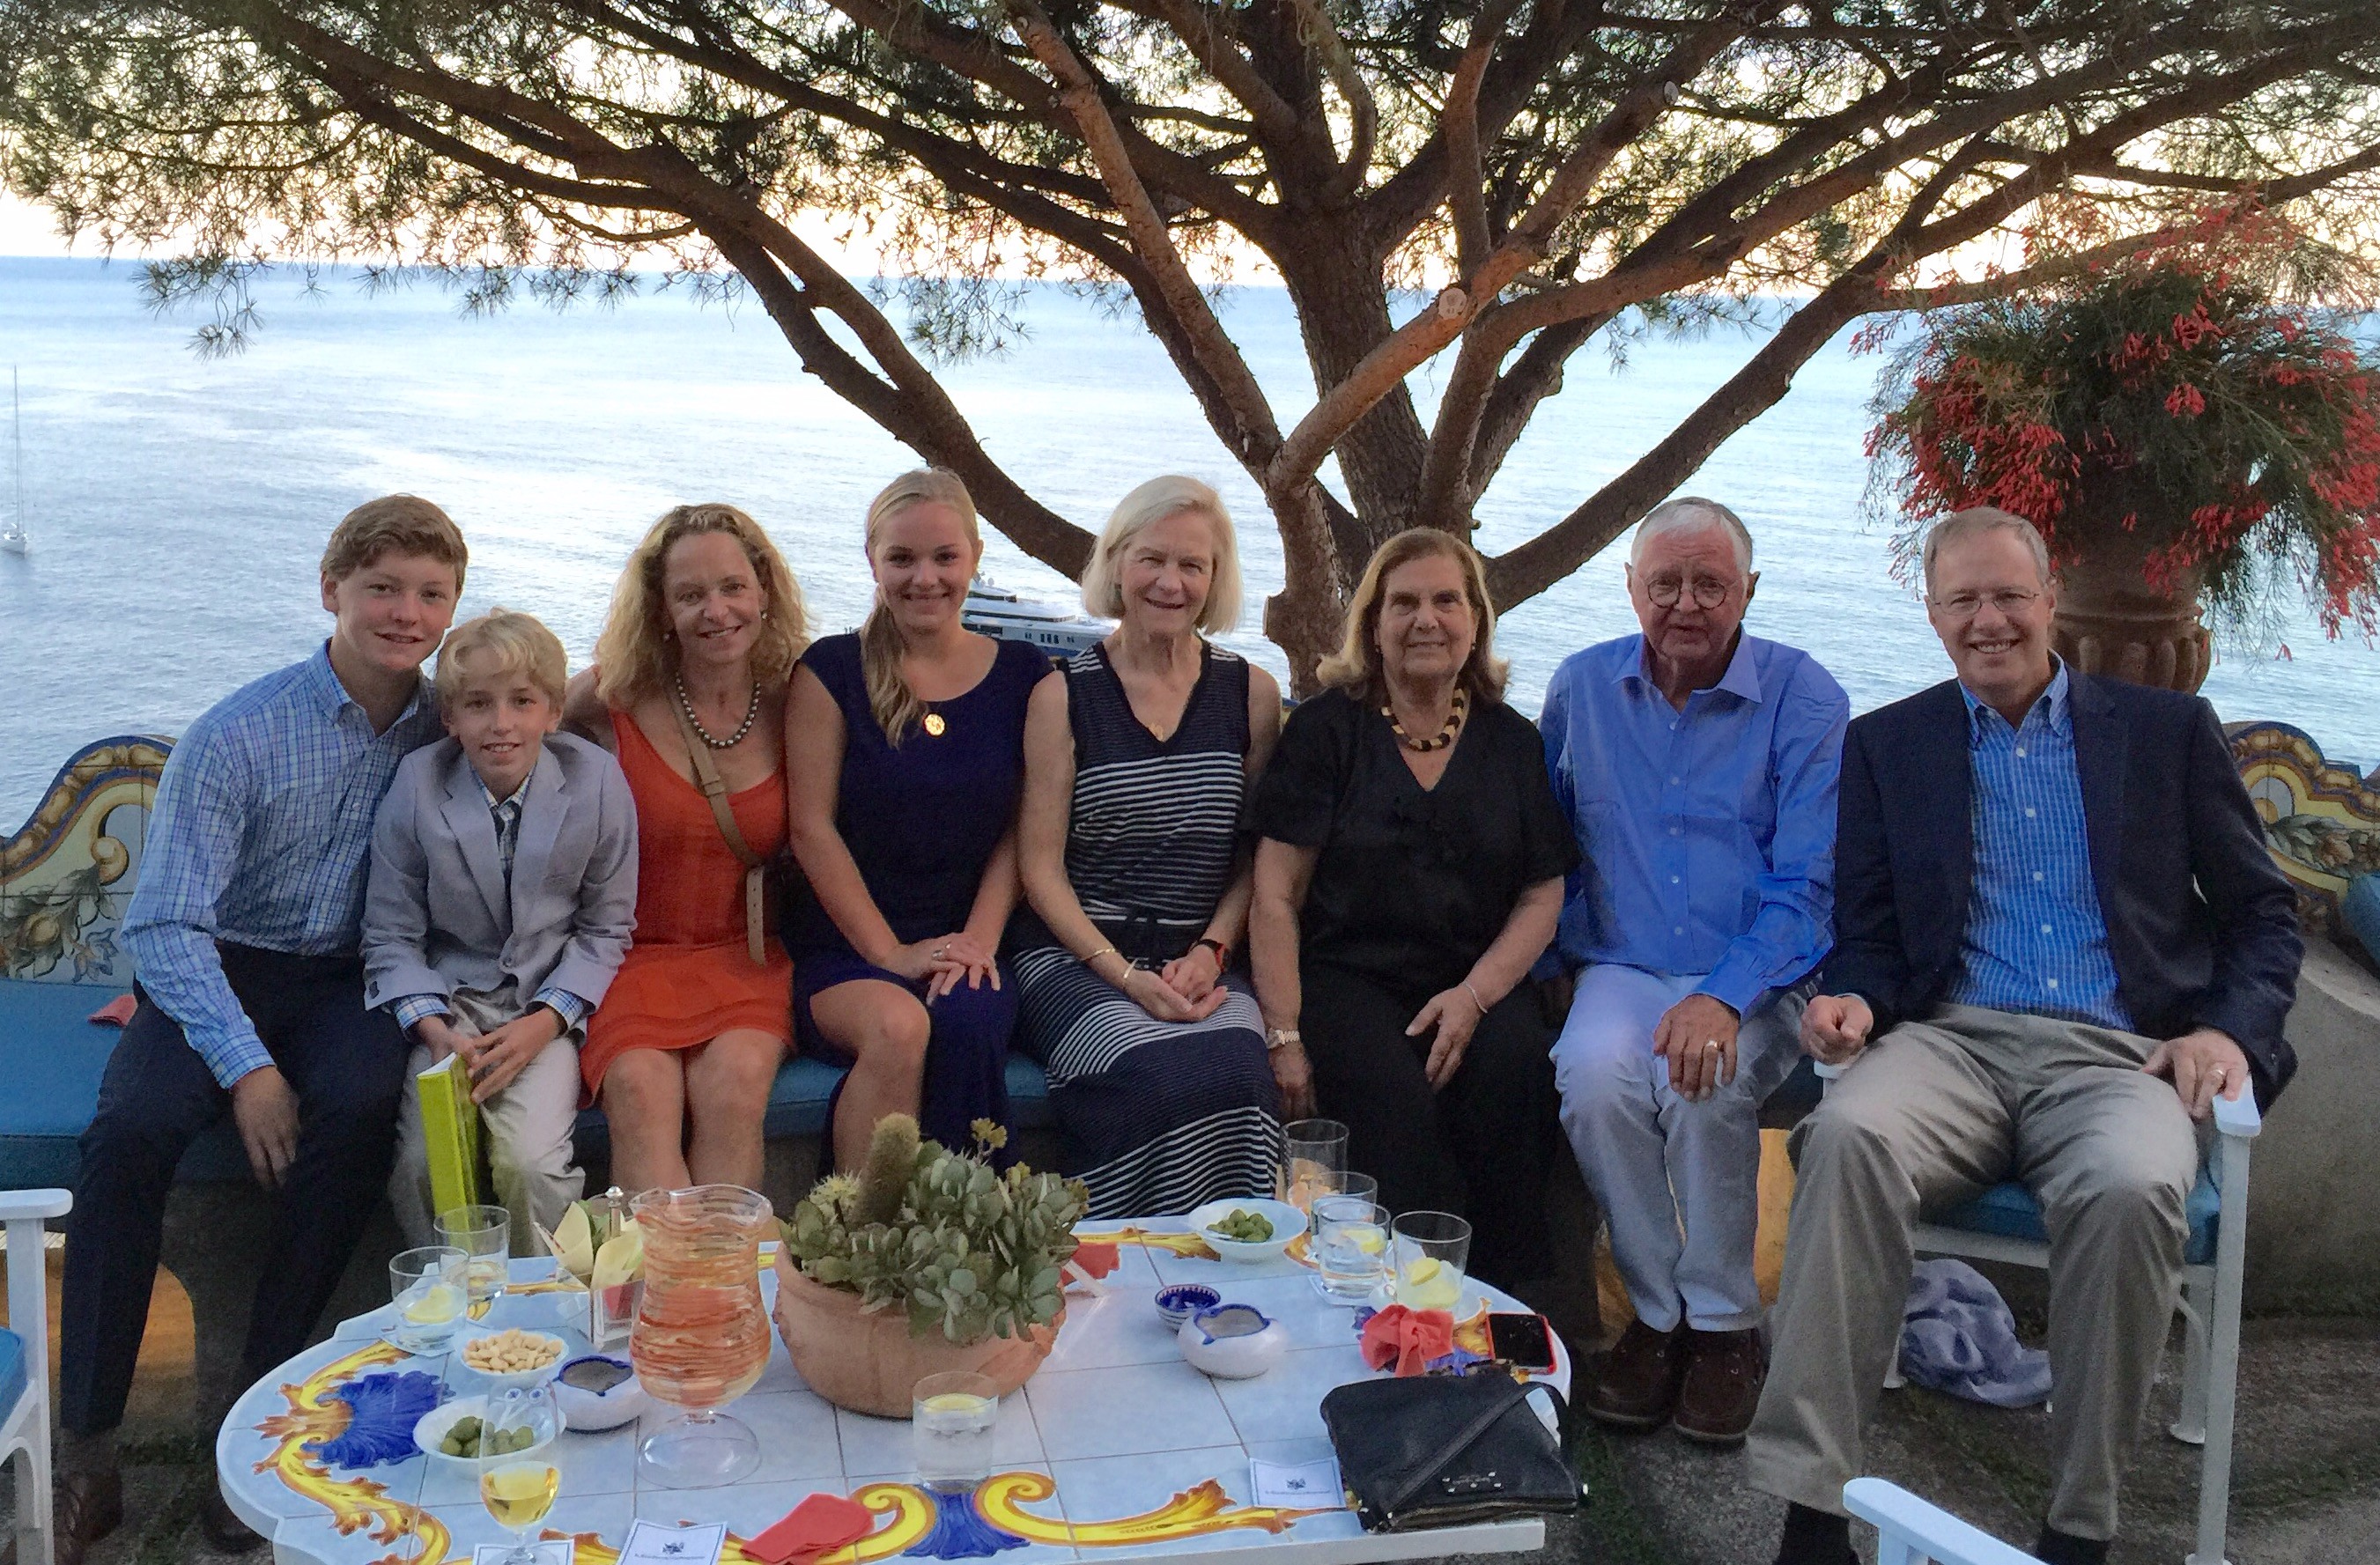 by Kristie Ratzlaff and Sally Nordstrom: Celebrating Fathers Day with family in Positano, Italy, with their friend Virginia Attanasio, owner of Hotel Il San Pietro.